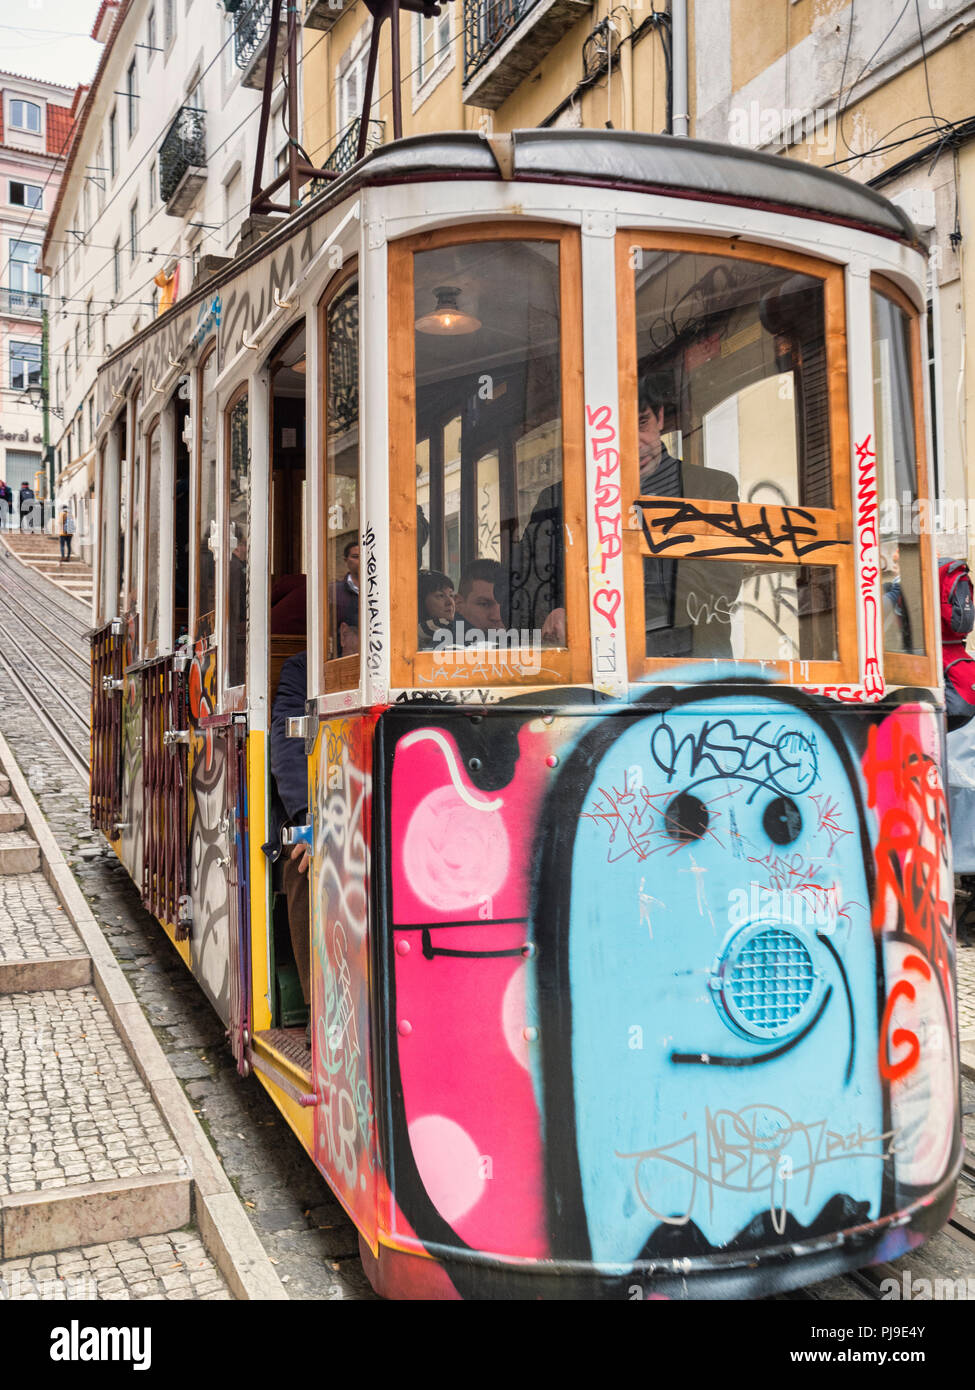 7 March 2018: Lisbon Portugal - The Bica Lift, or Elevador da Bica, decorated with graffiti, in the Misericordia district, a funicular railway line Stock Photo